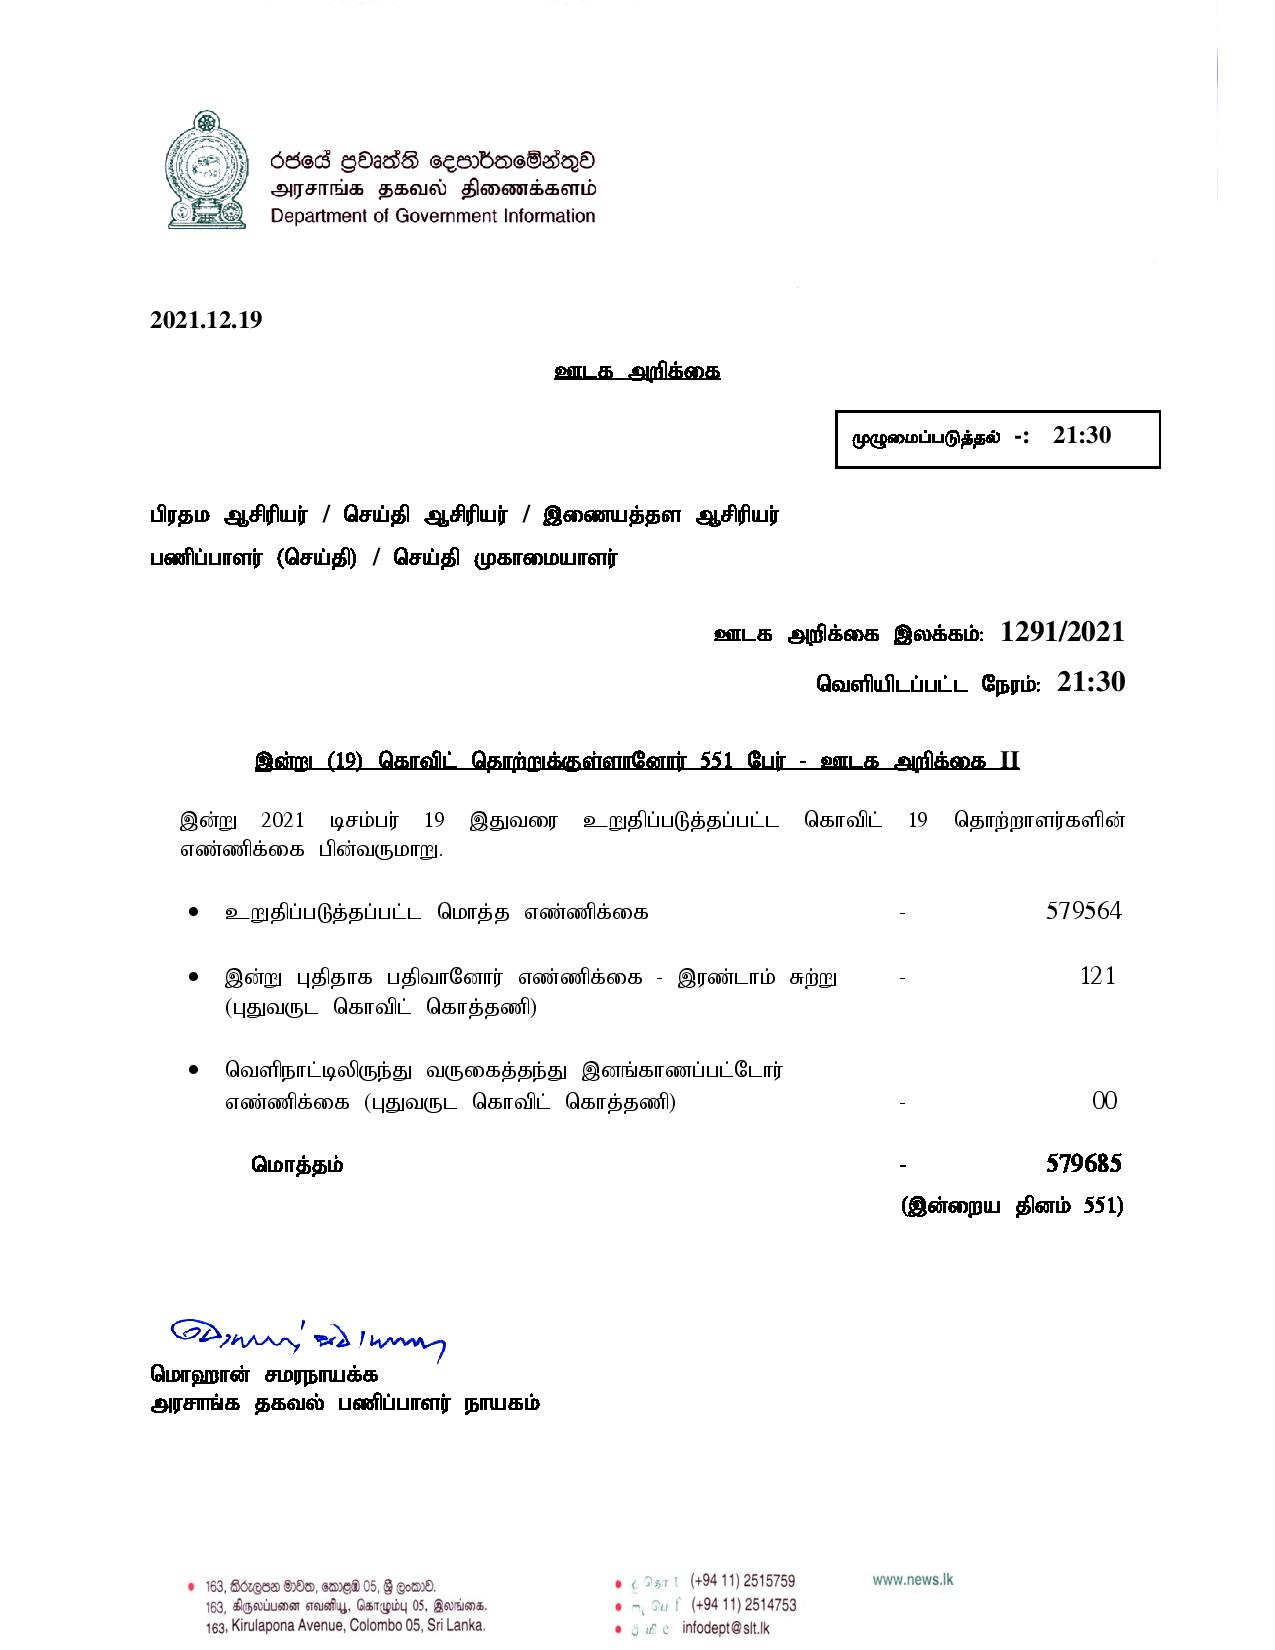 Press Release 1291 Tamil page 001